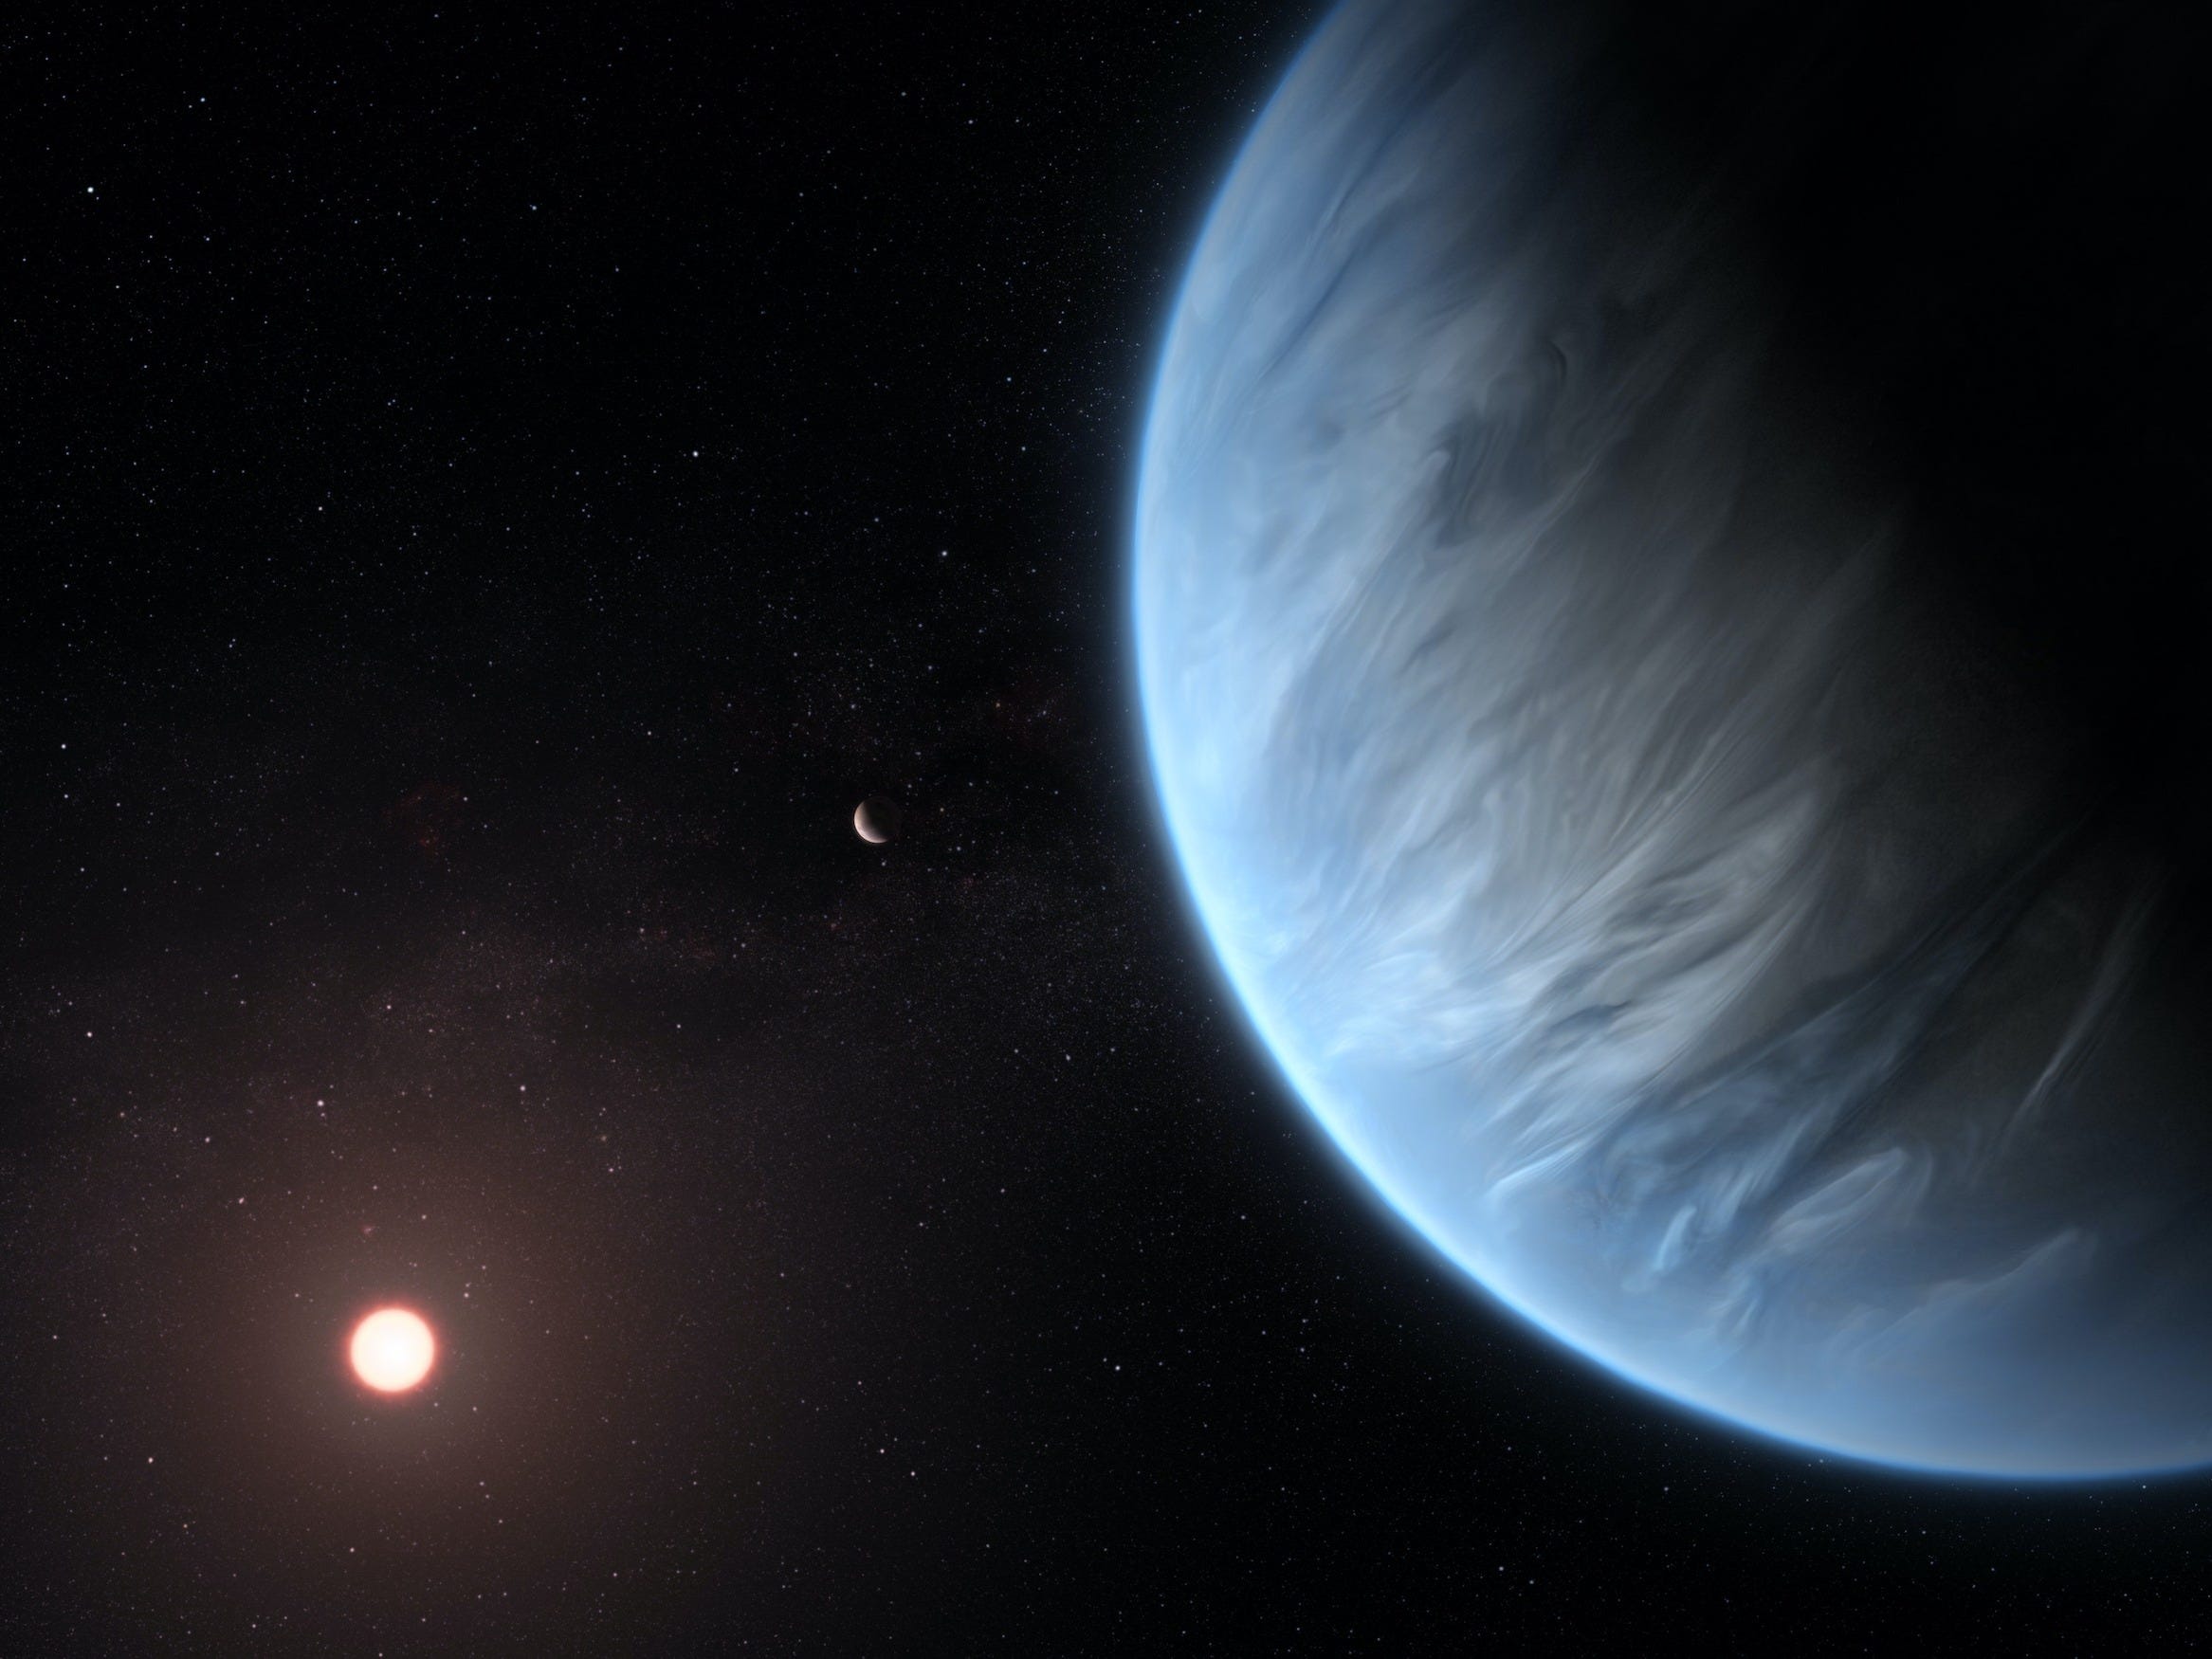 An artist’s impression shows the planet K2-18b, its host star and an accompanying planet in this system. K2-18b is now the only super-Earth exoplanet known to host both water and temperatures that could support life. UCL researchers used archive data from 2016 and 2017 captured by the NASA/ESA Hubble Space Telescope and developed open-source algorithms to analyze the starlight filtered through K2-18b’s atmosphere. The results revealed the molecular signature of water vapor, also indicating the presence of hydrogen and helium in the planet’s atmosphere.